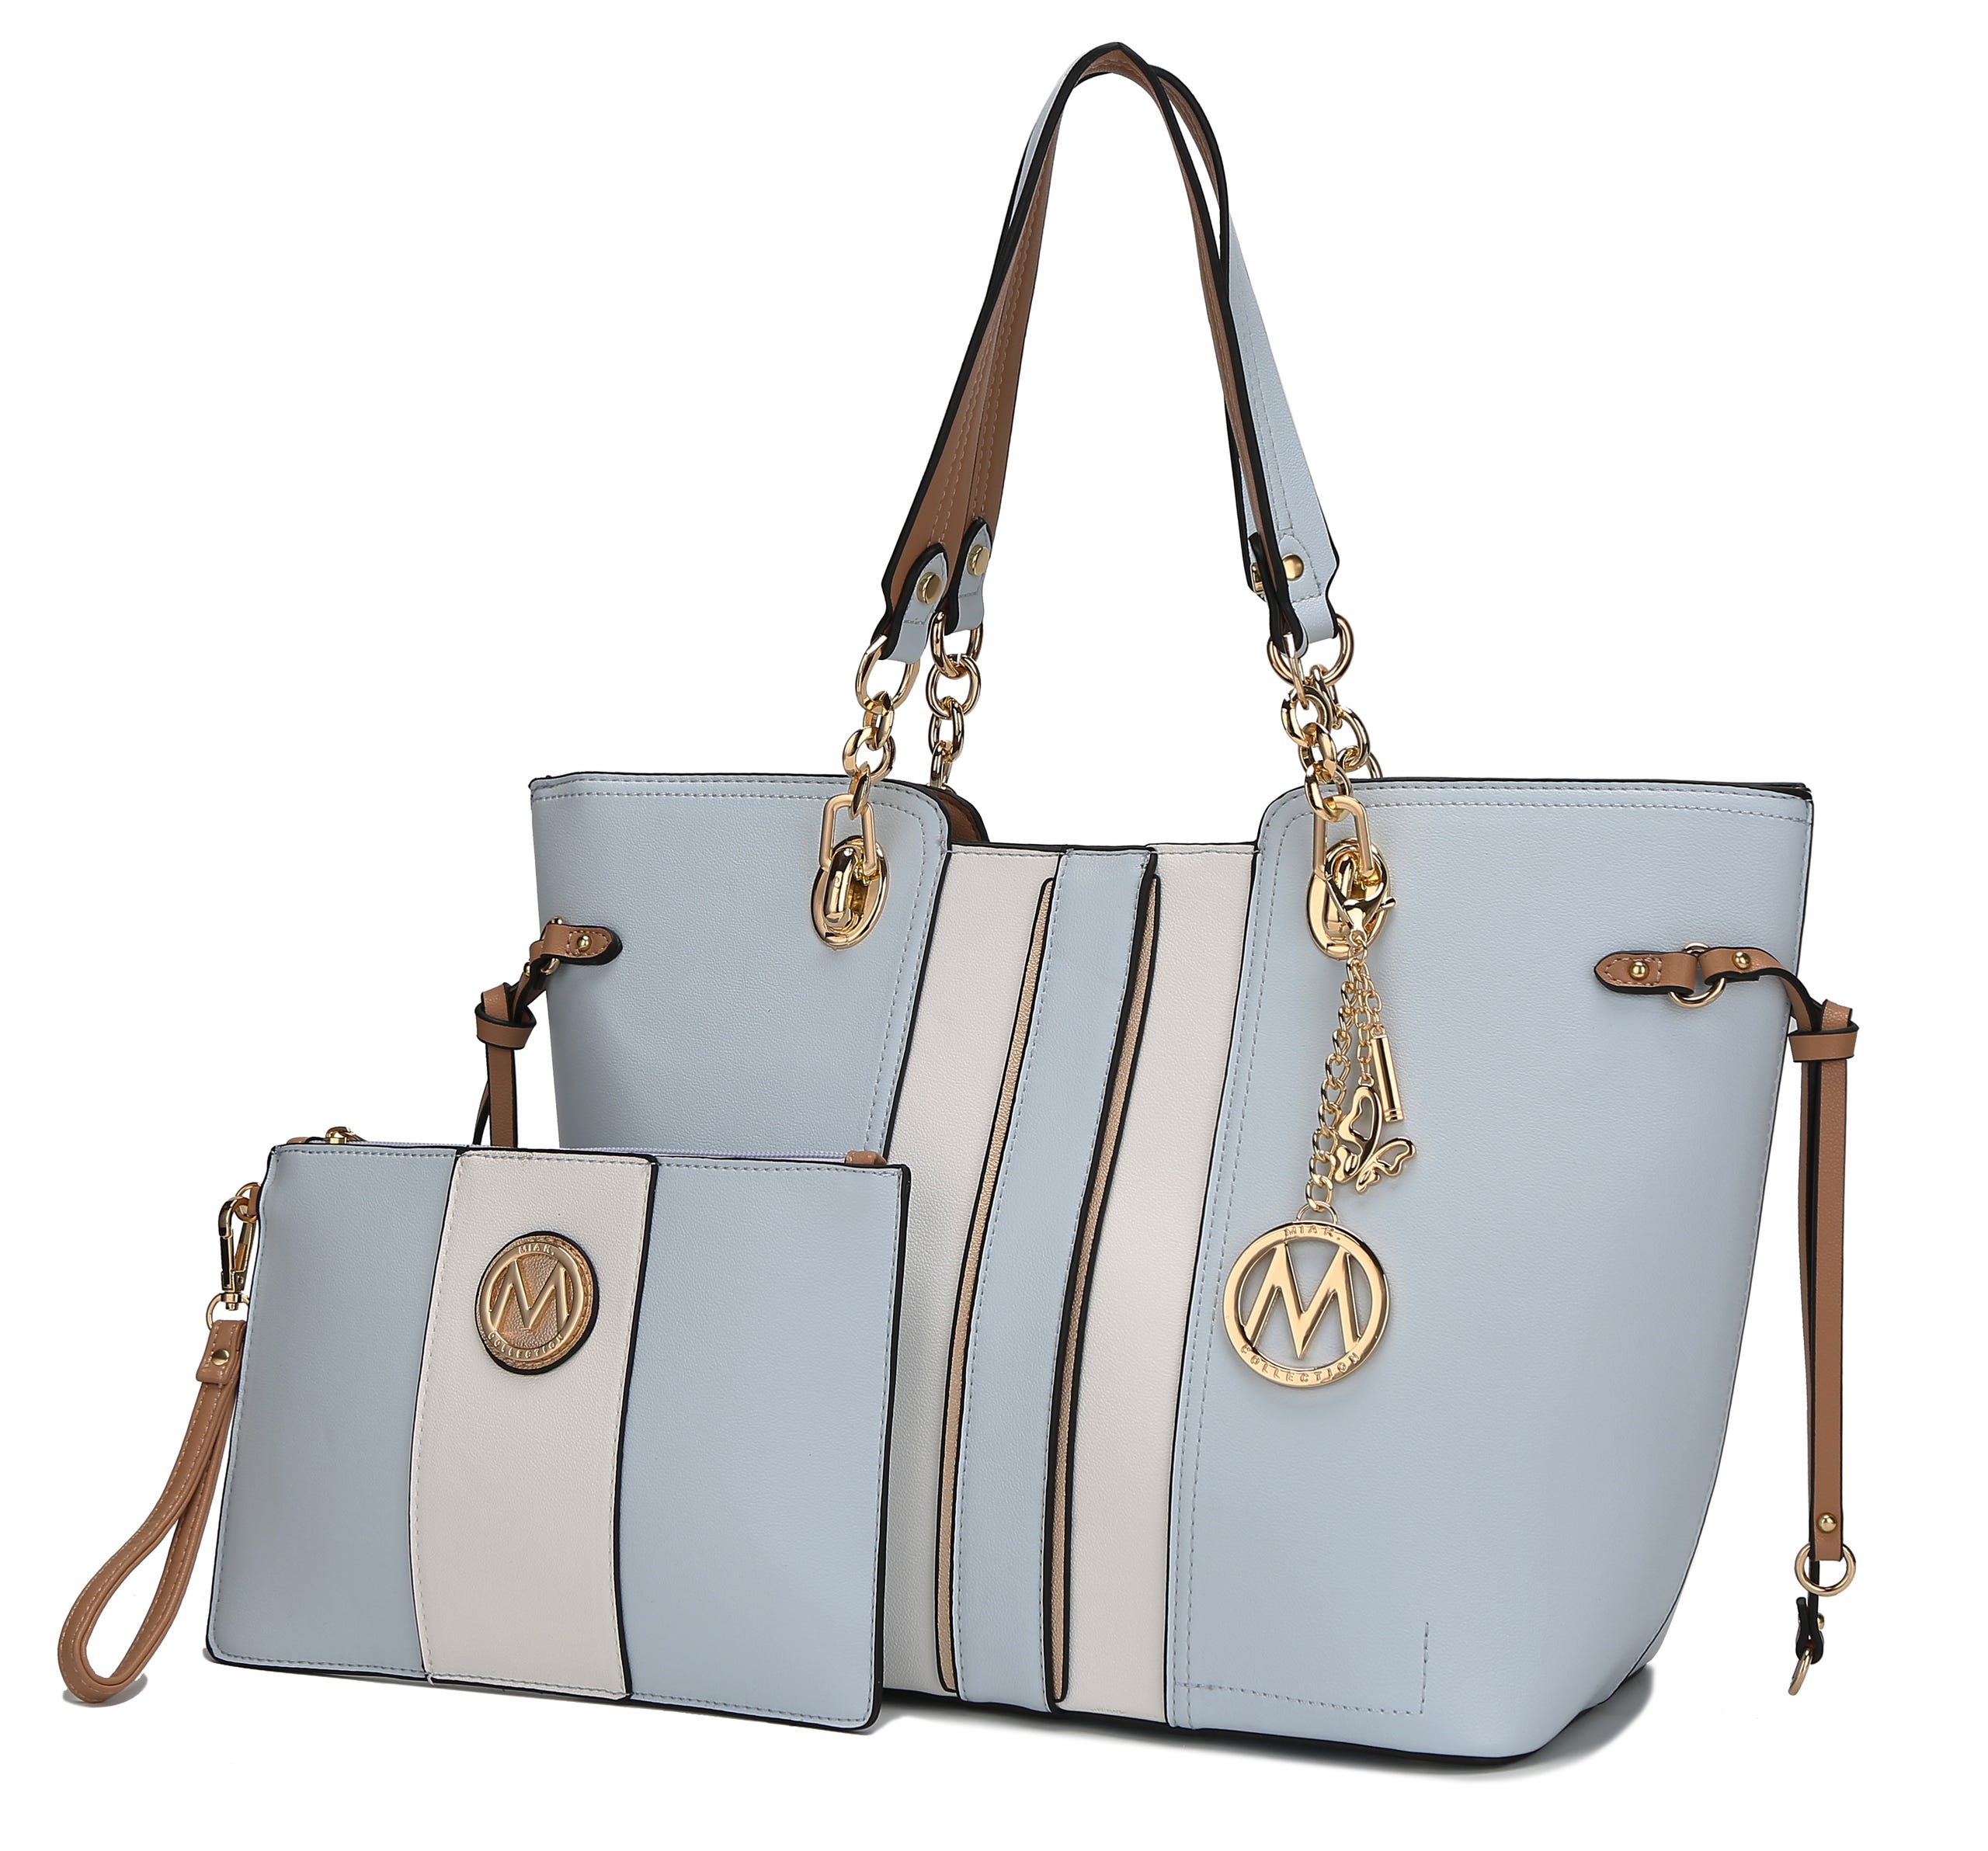 A light blue and cream tote bag with matching wristlet, both featuring gold-tone accents and logo charms.